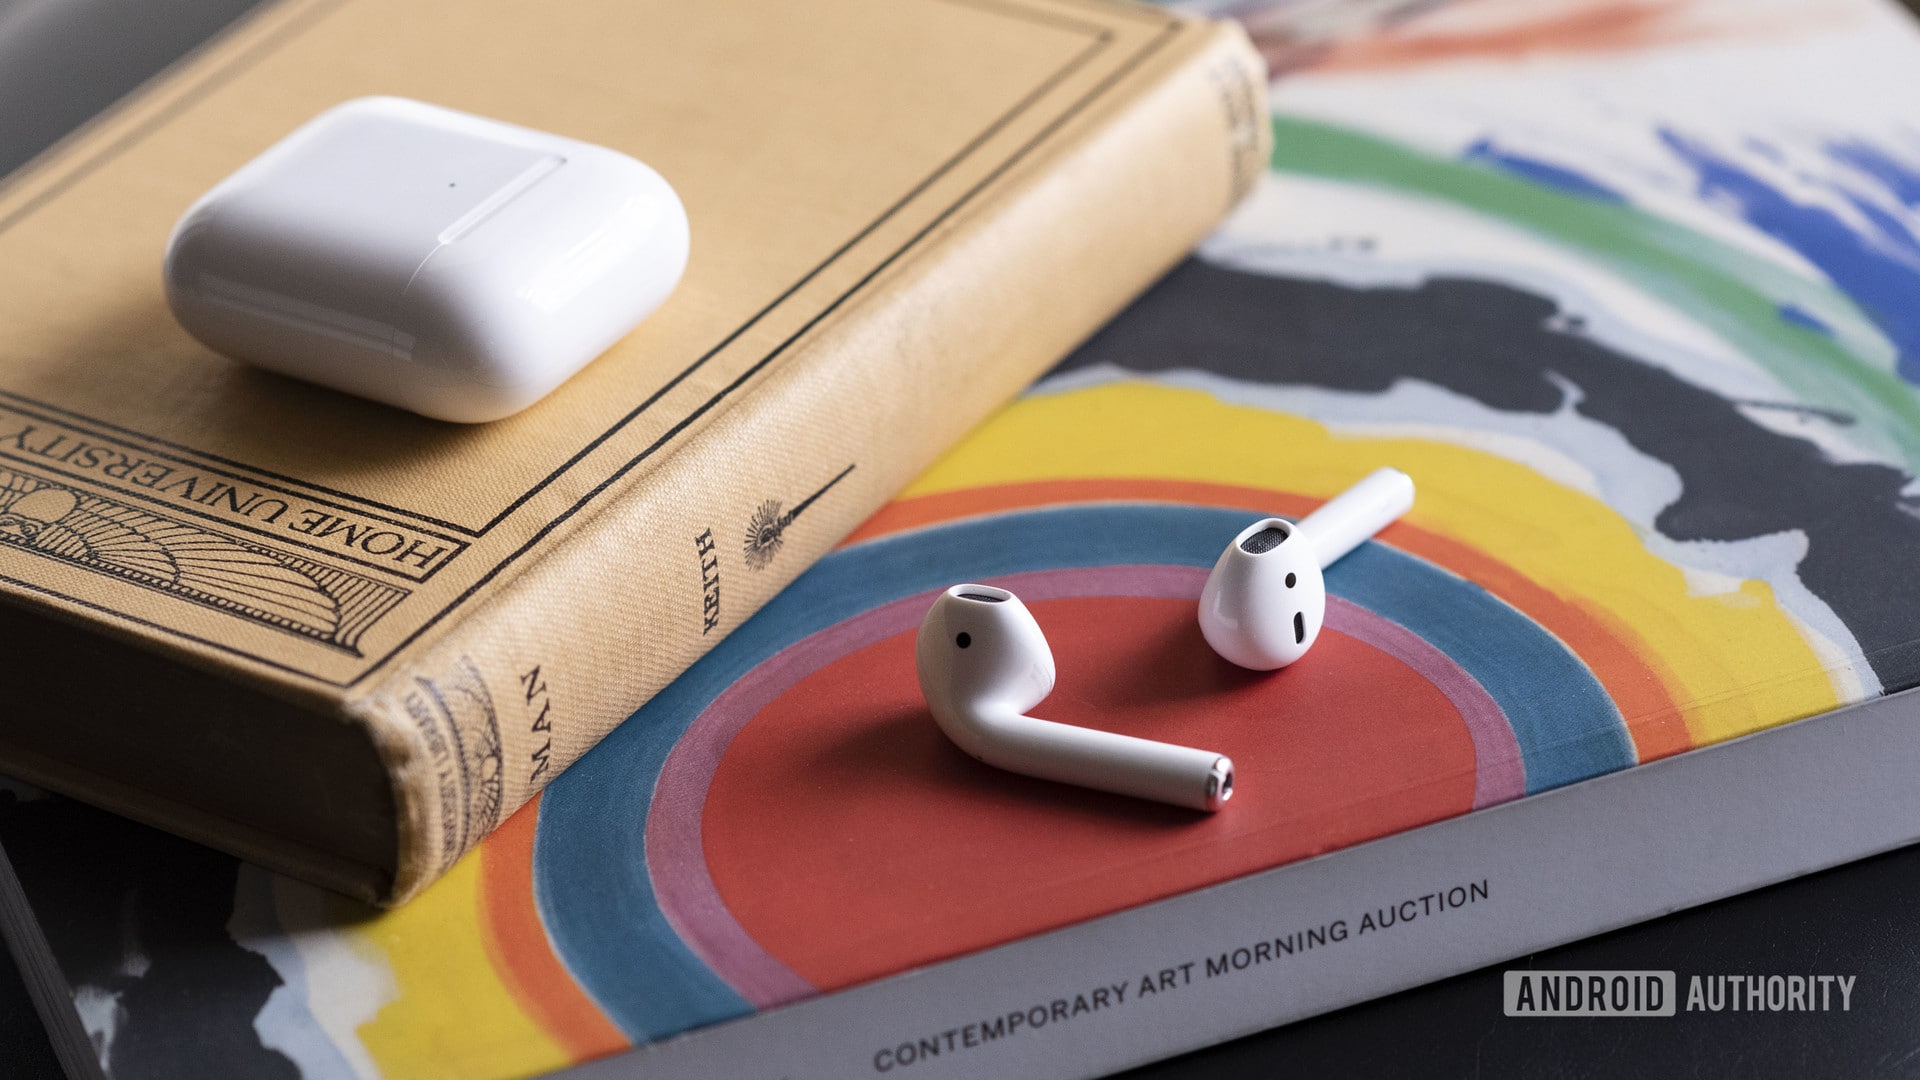 Apple new AirPods 2 outside of the case resting on a book.